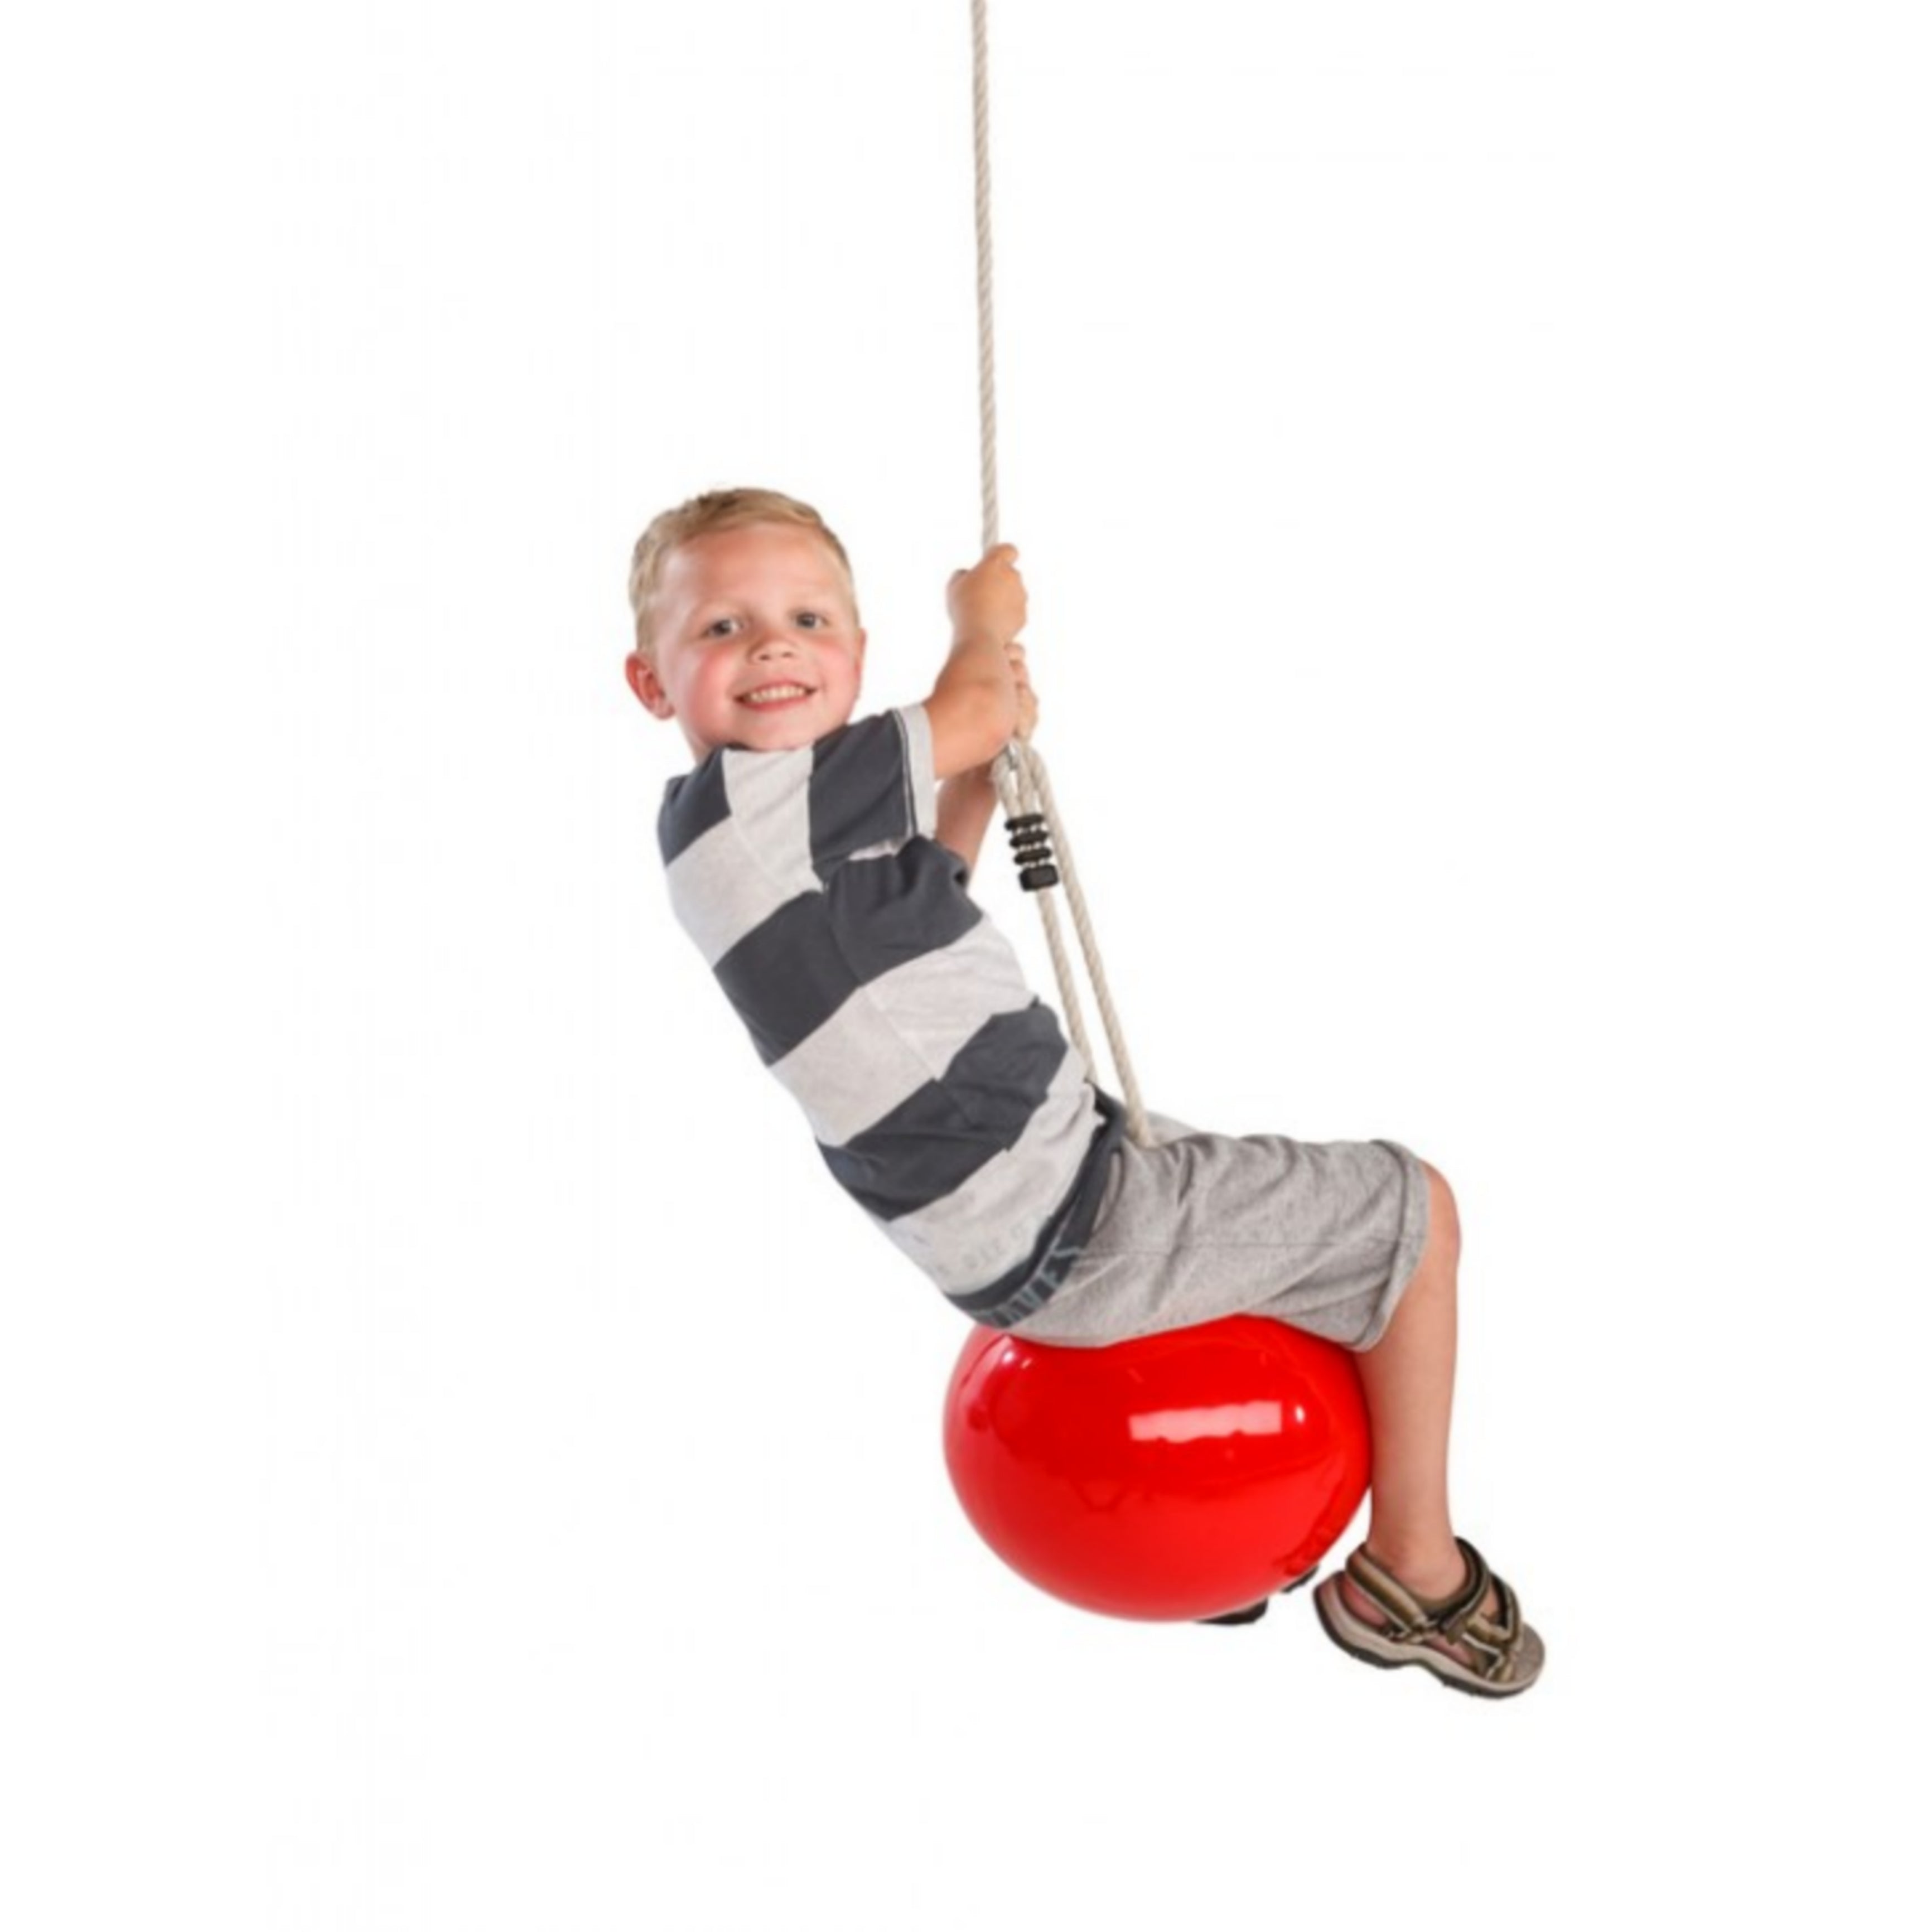 Buoy Ball ‘MANDORA’ 30cm Swing With Adjustable Rope - Red